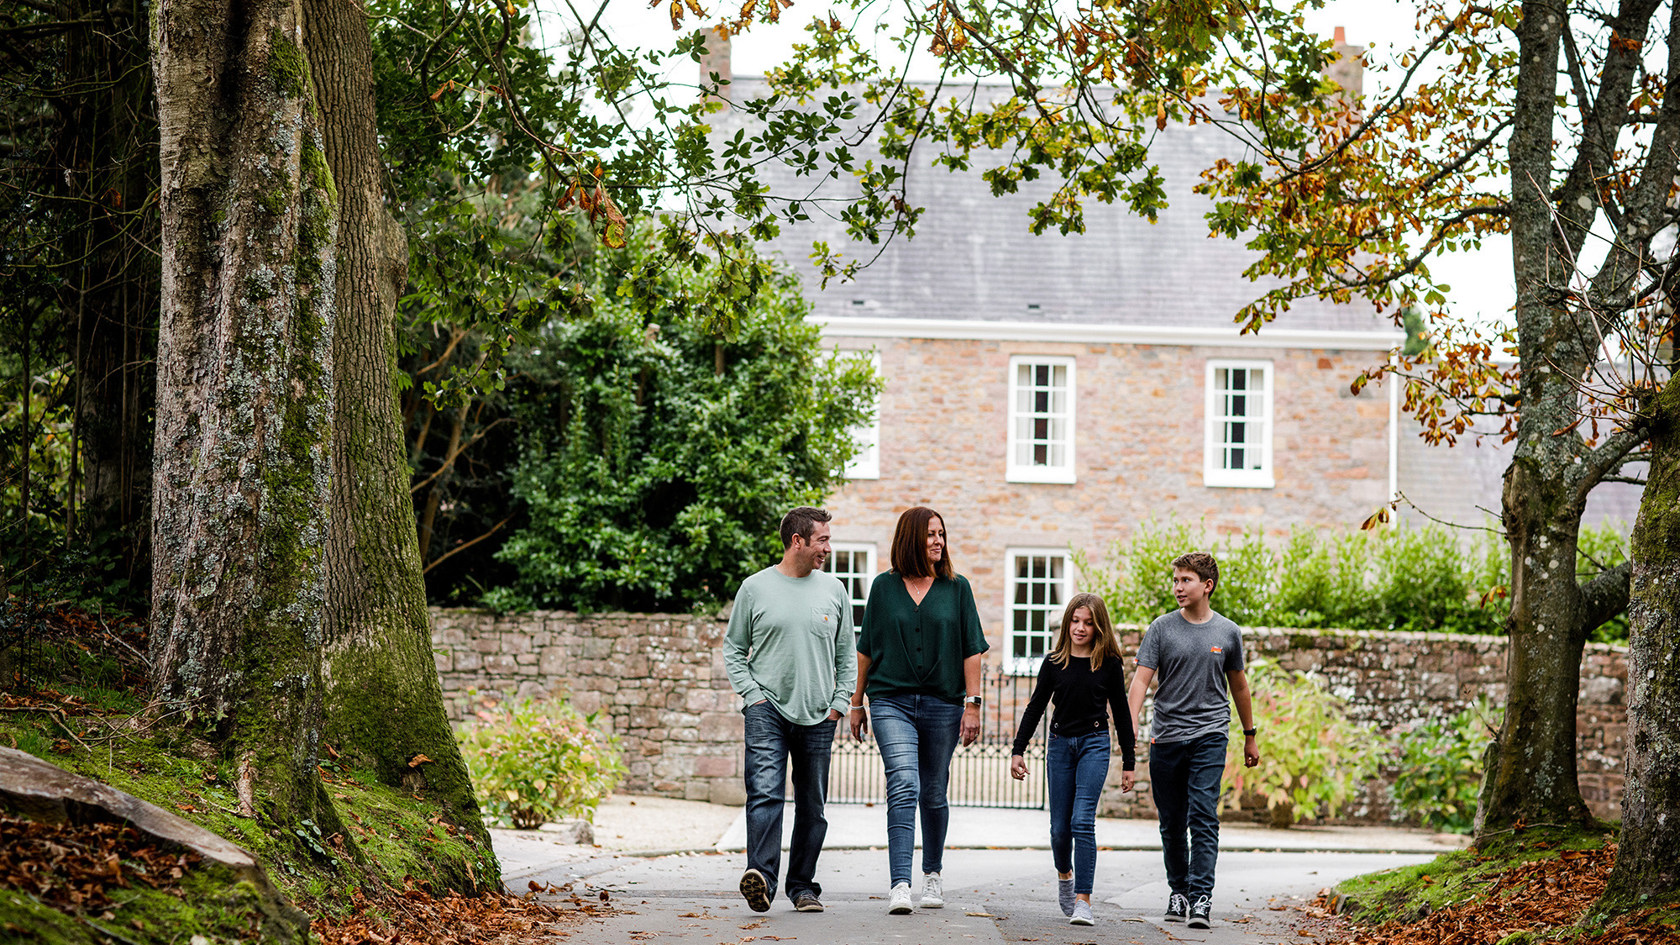 A family walk past a period house in the Jersey countryside.